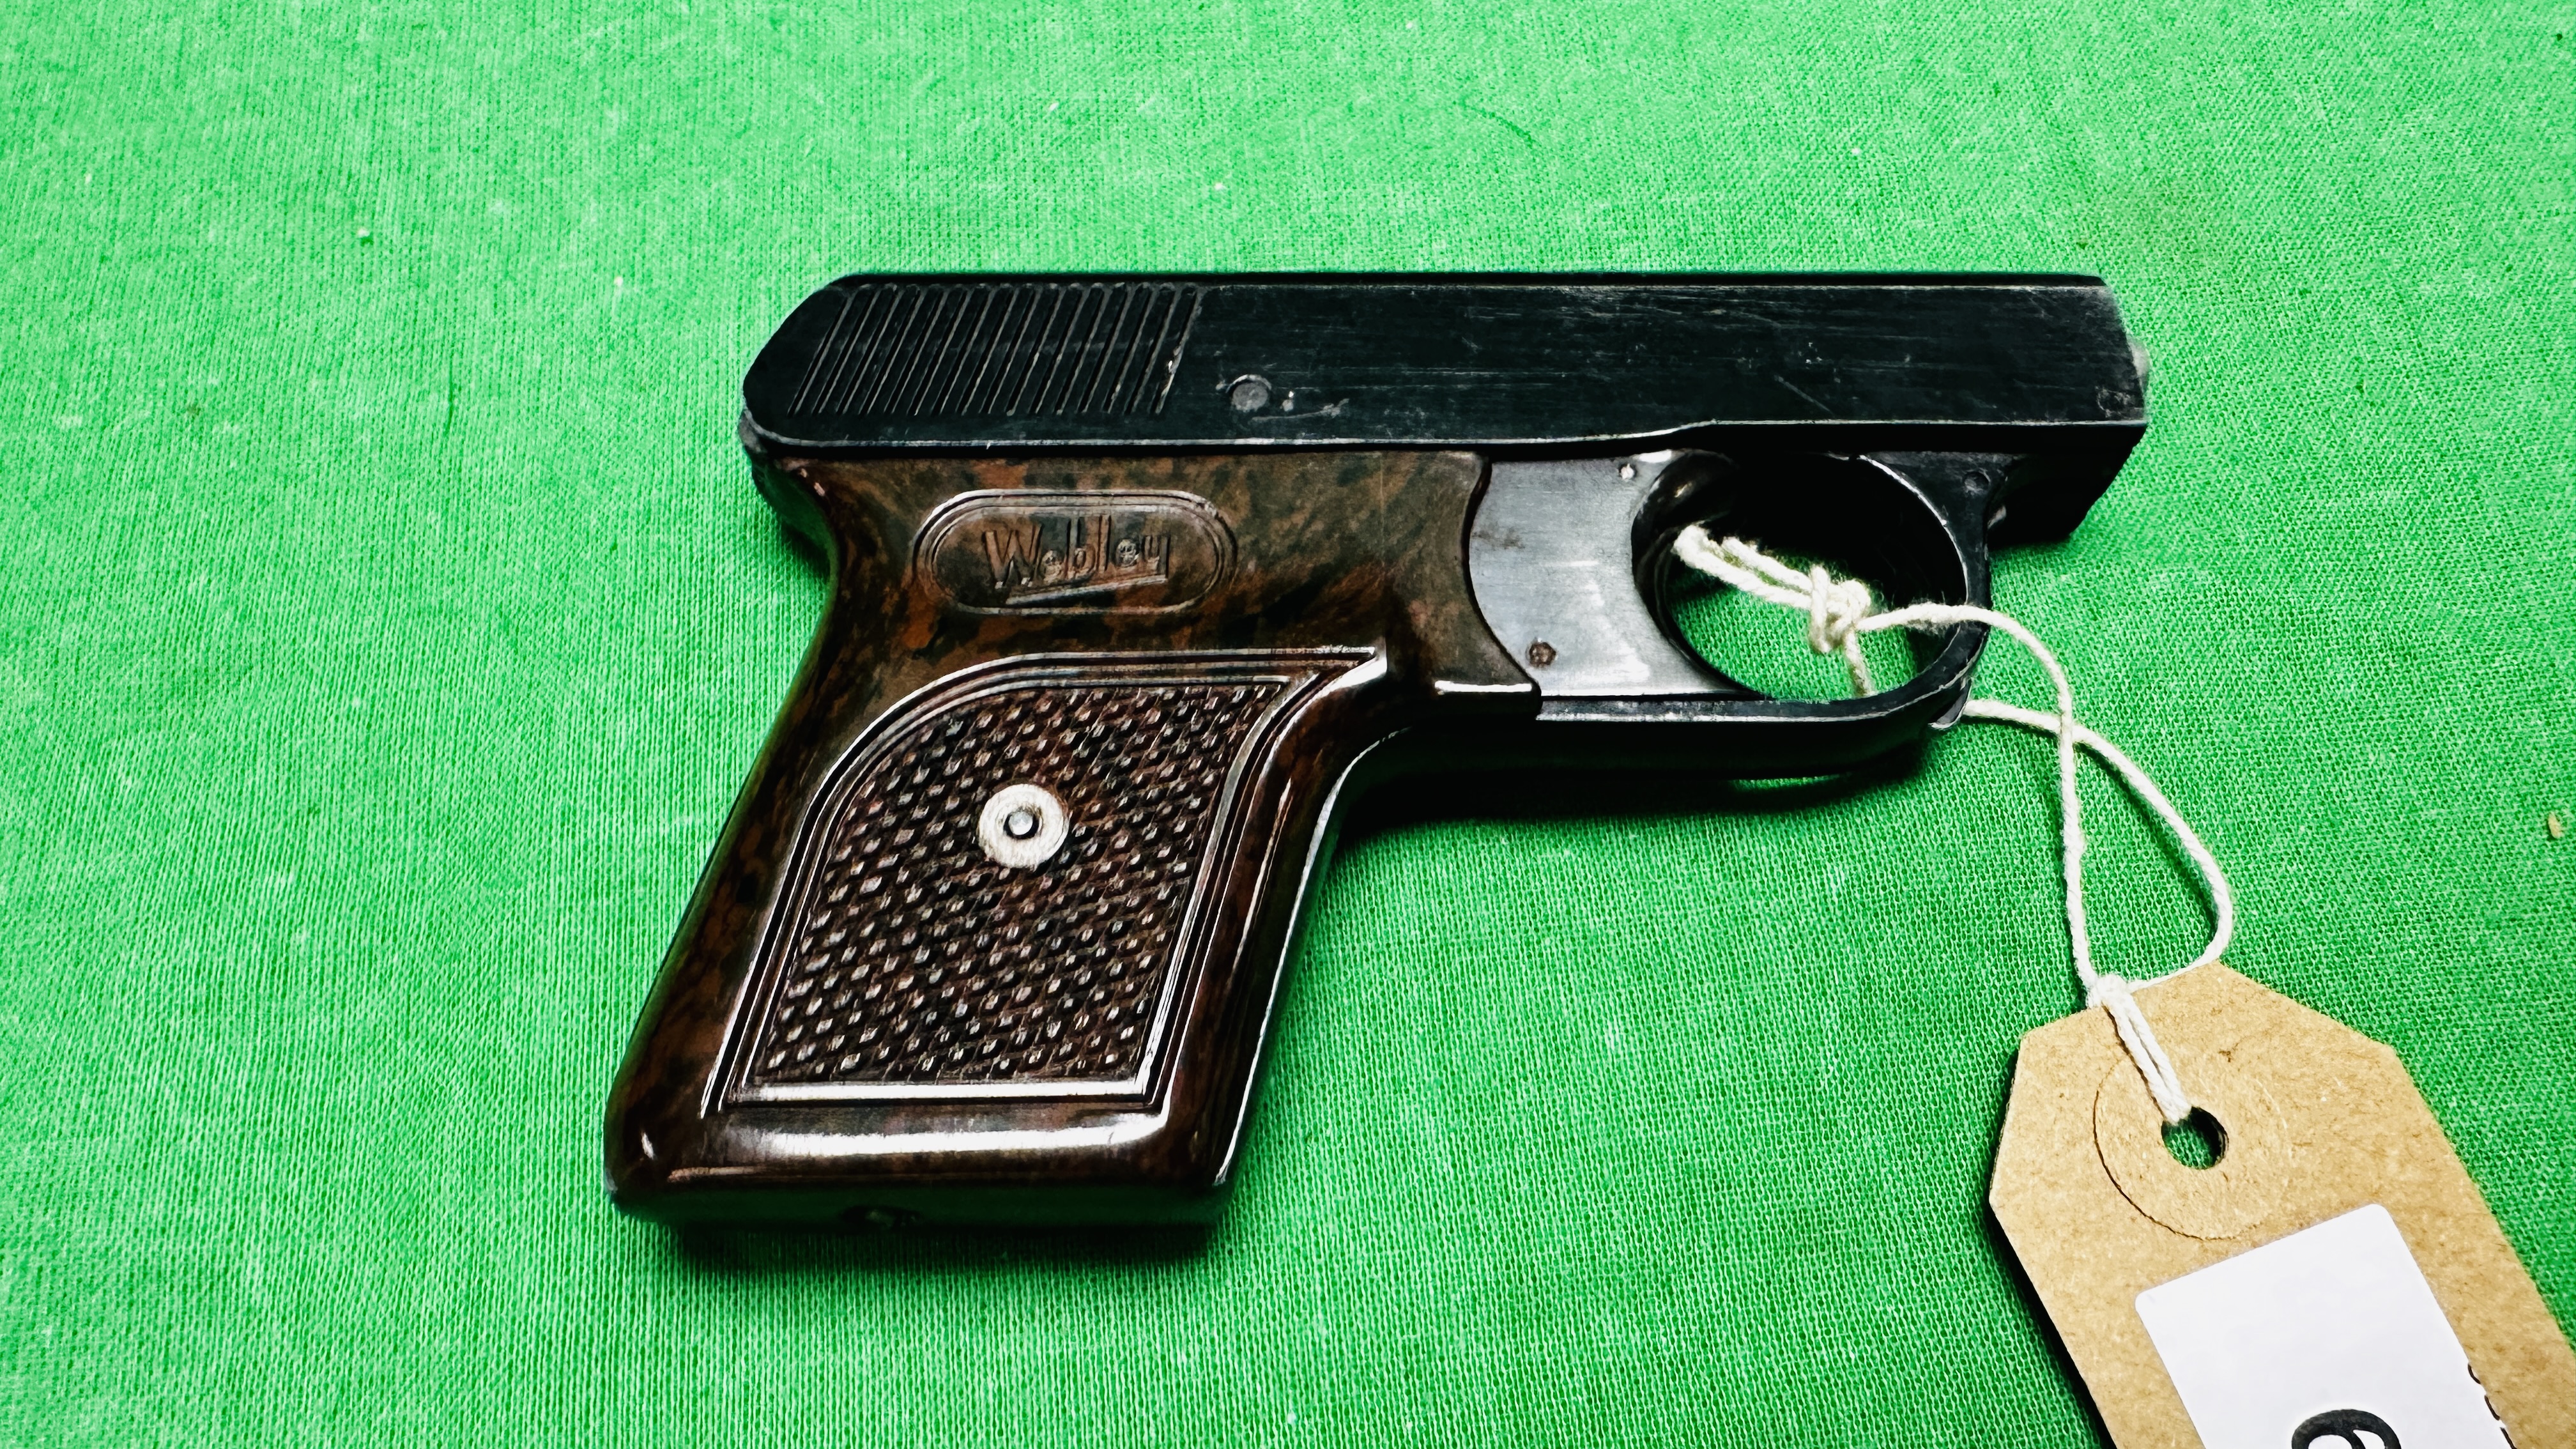 A VINTAGE WEBLEY SPORTS STARTING PISTOL MK3 WITH 6MM BLANKS - (ALL GUNS TO BE INSPECTED AND - Image 6 of 7